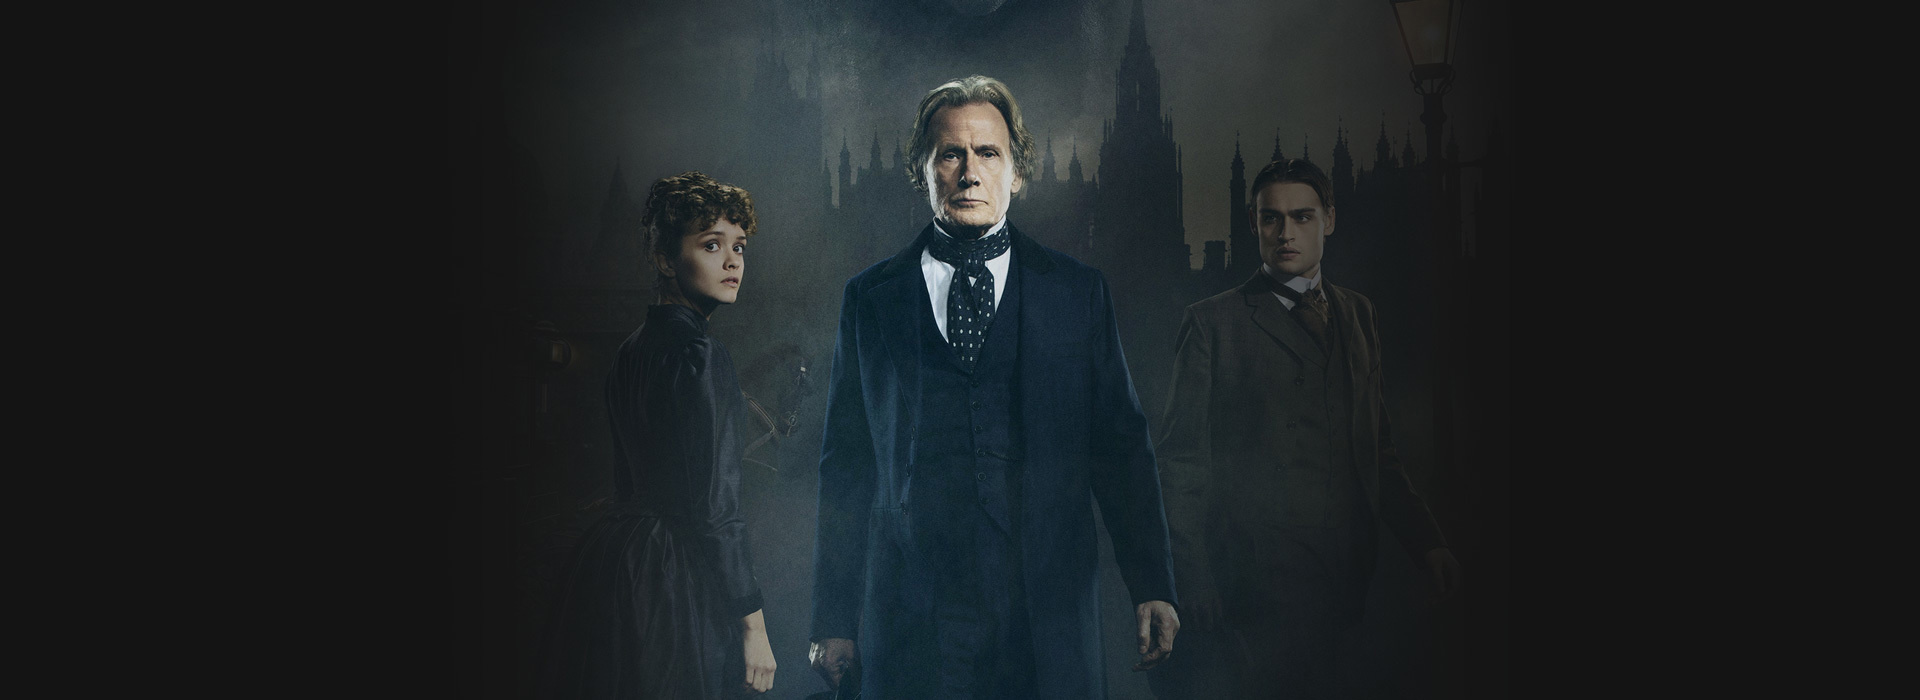 Movie poster The Limehouse Golem